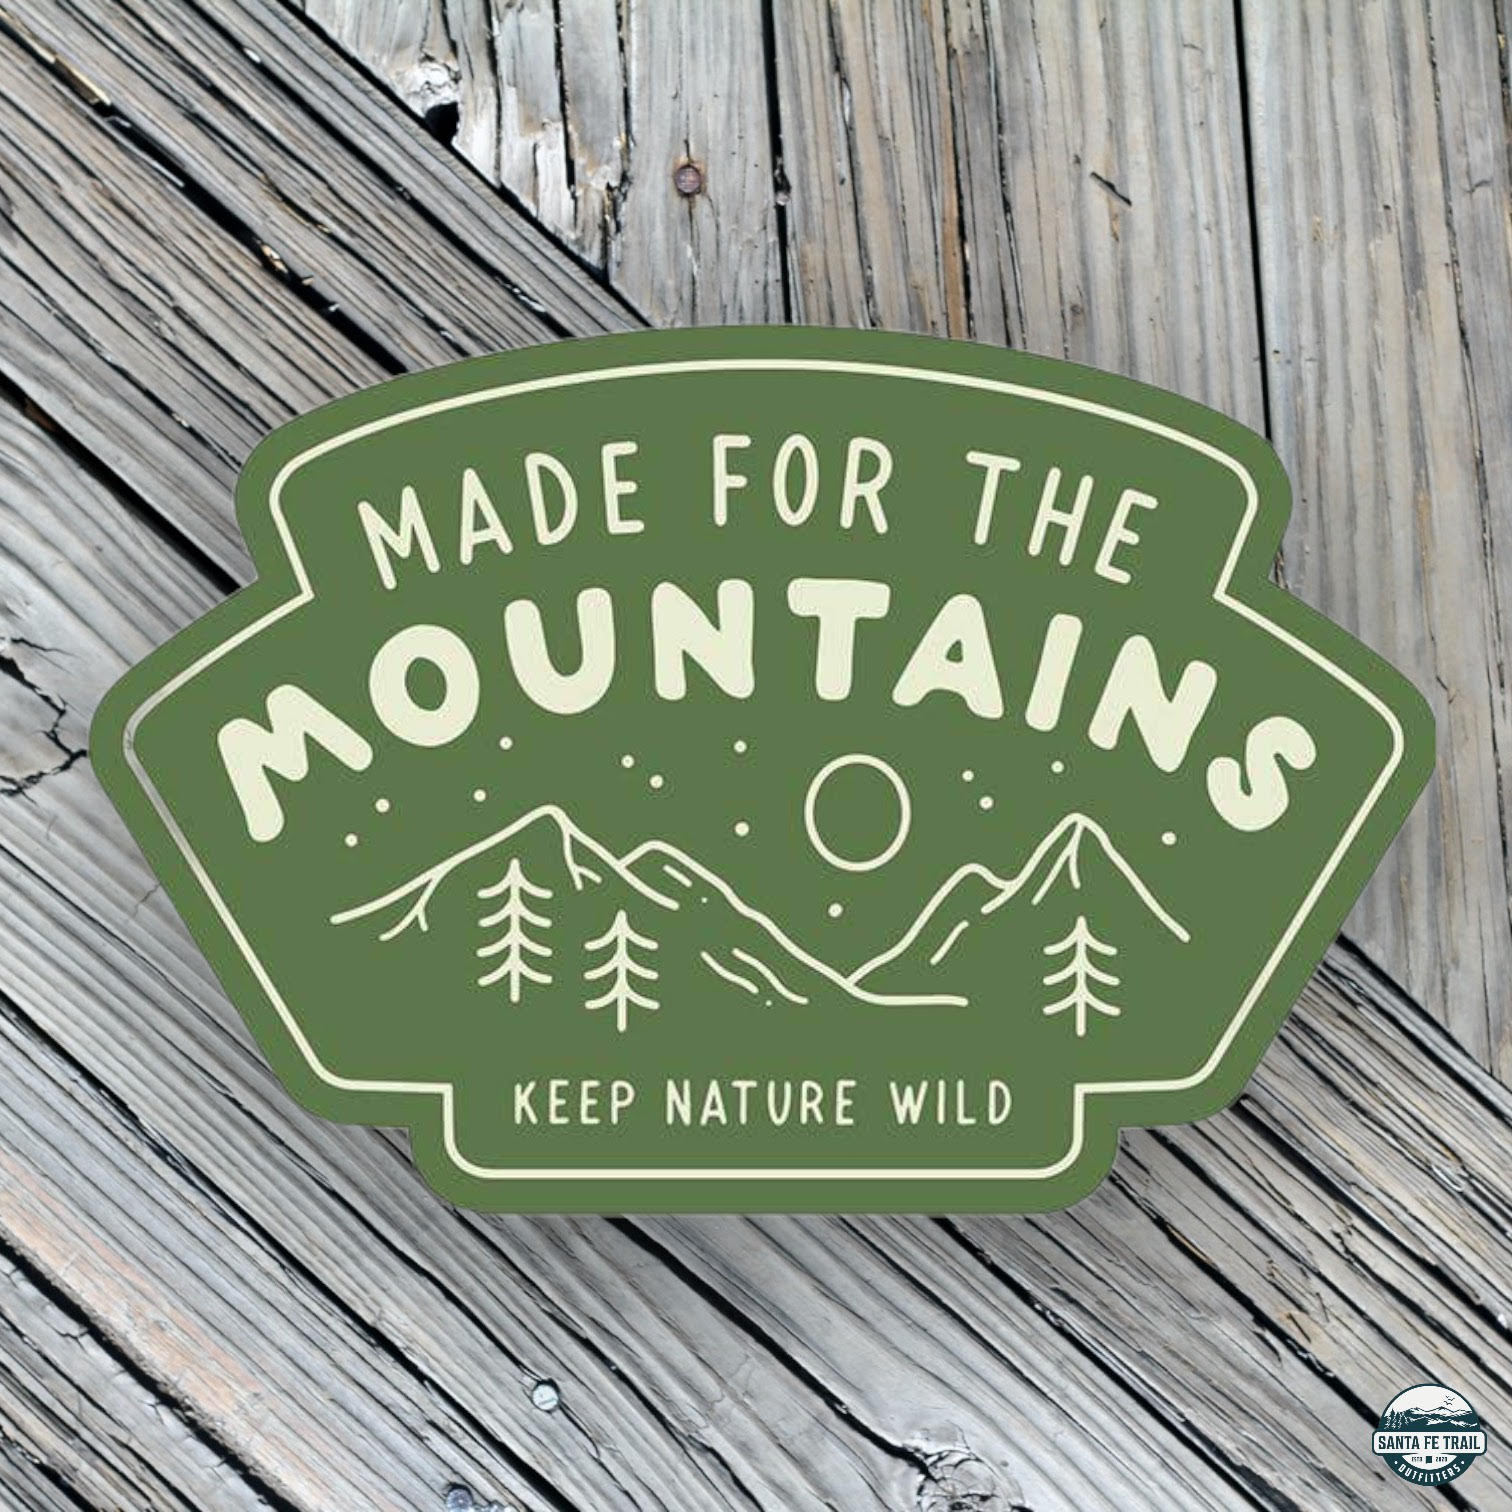 Made for the Mountains Sticker - Made for the Mountains Sticker